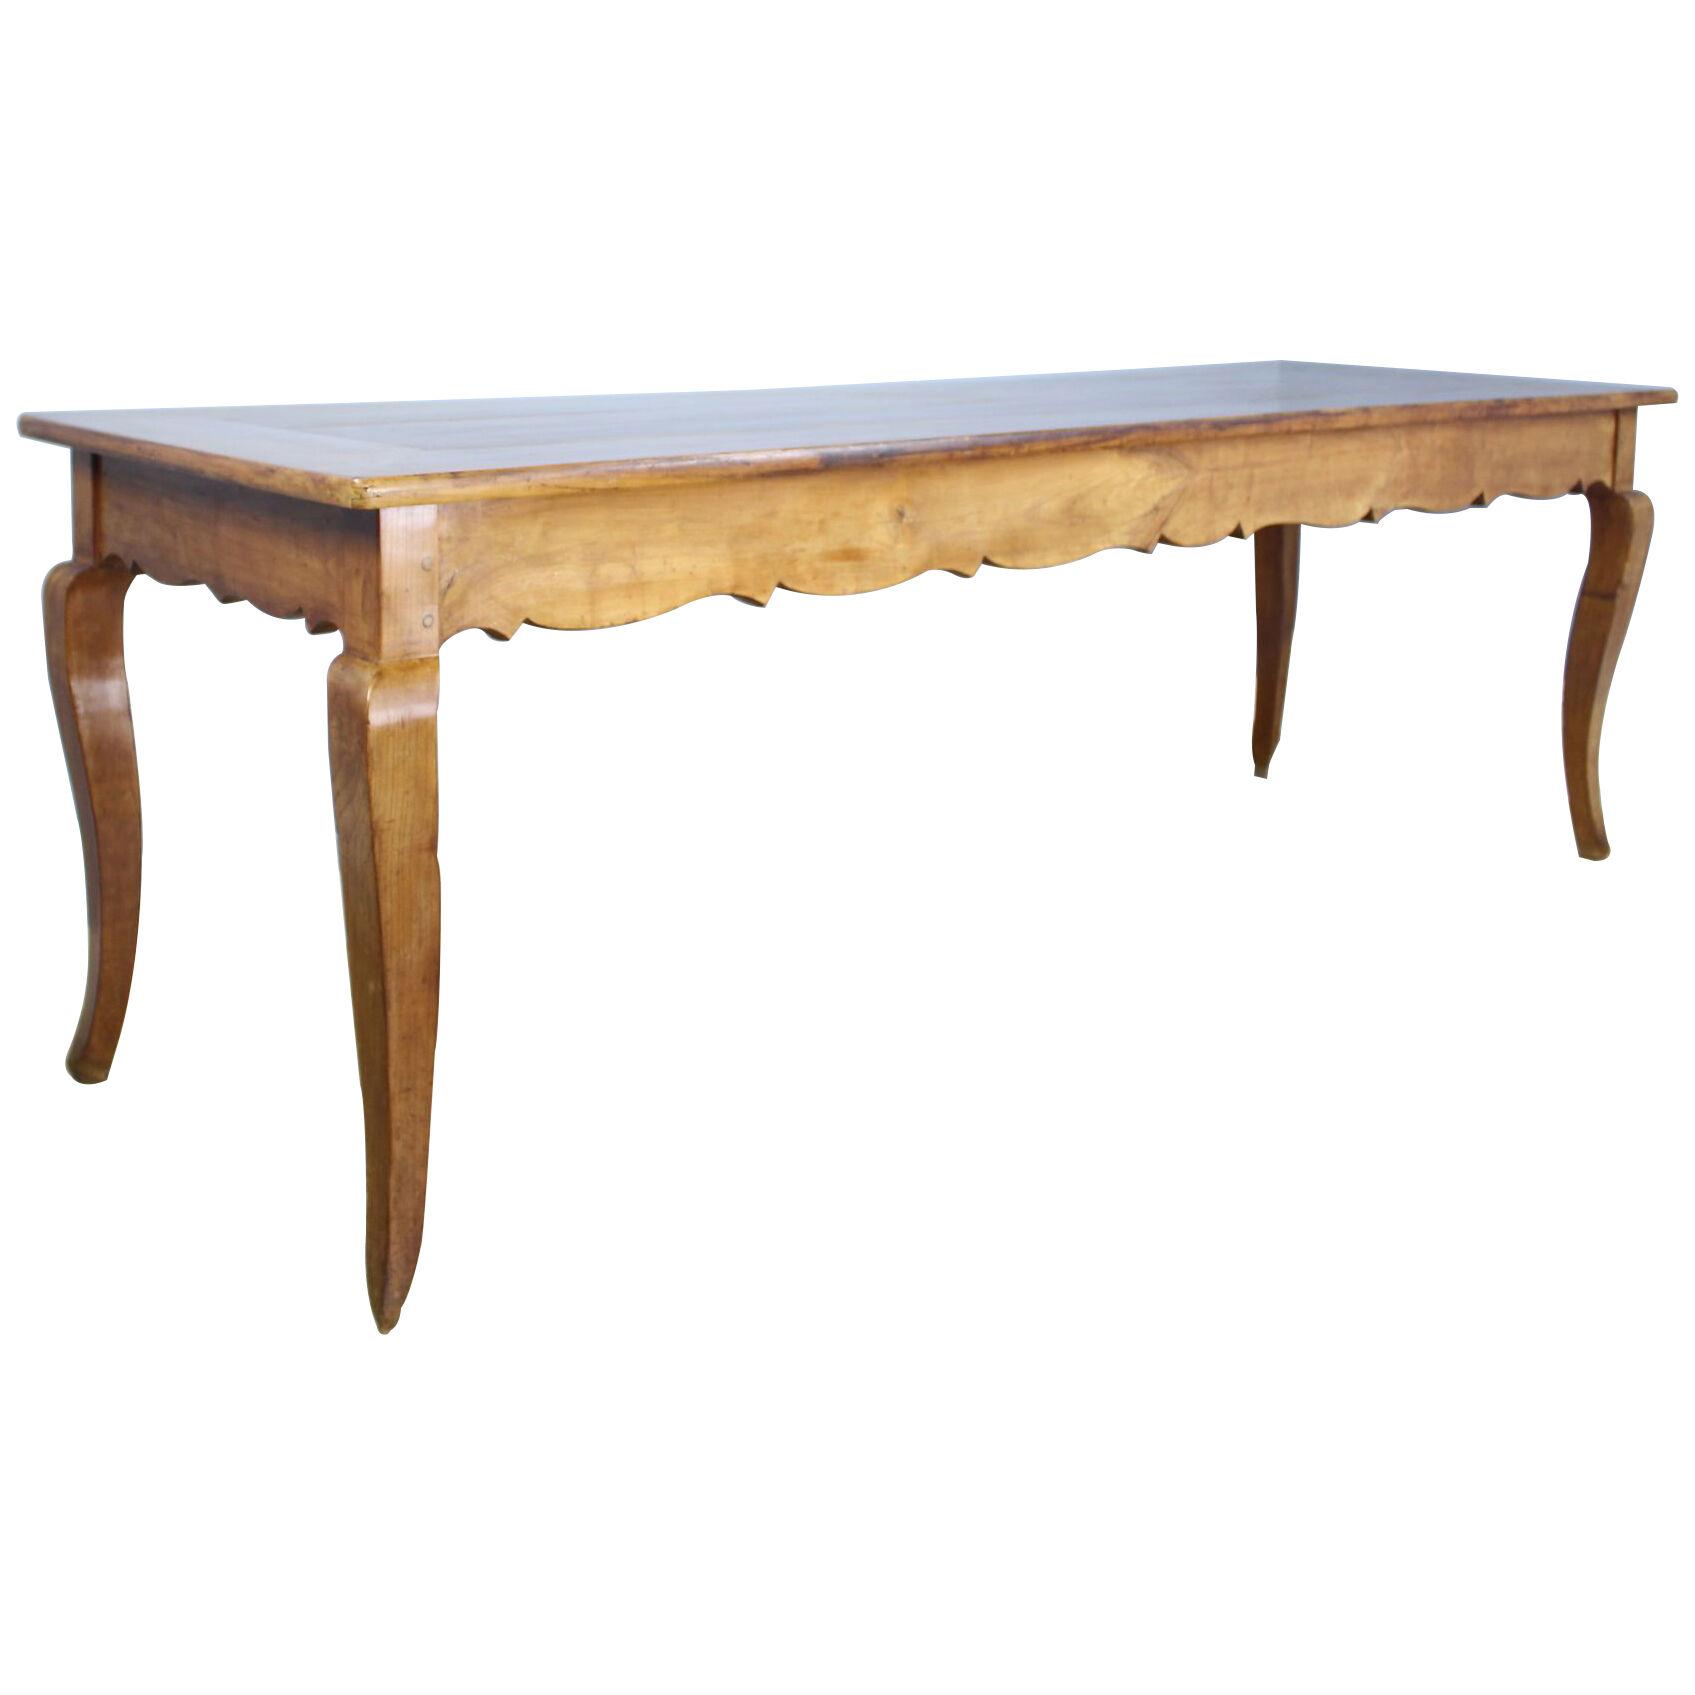 Antique Cabriole Leg Cherry Dining Table with Carved Apron